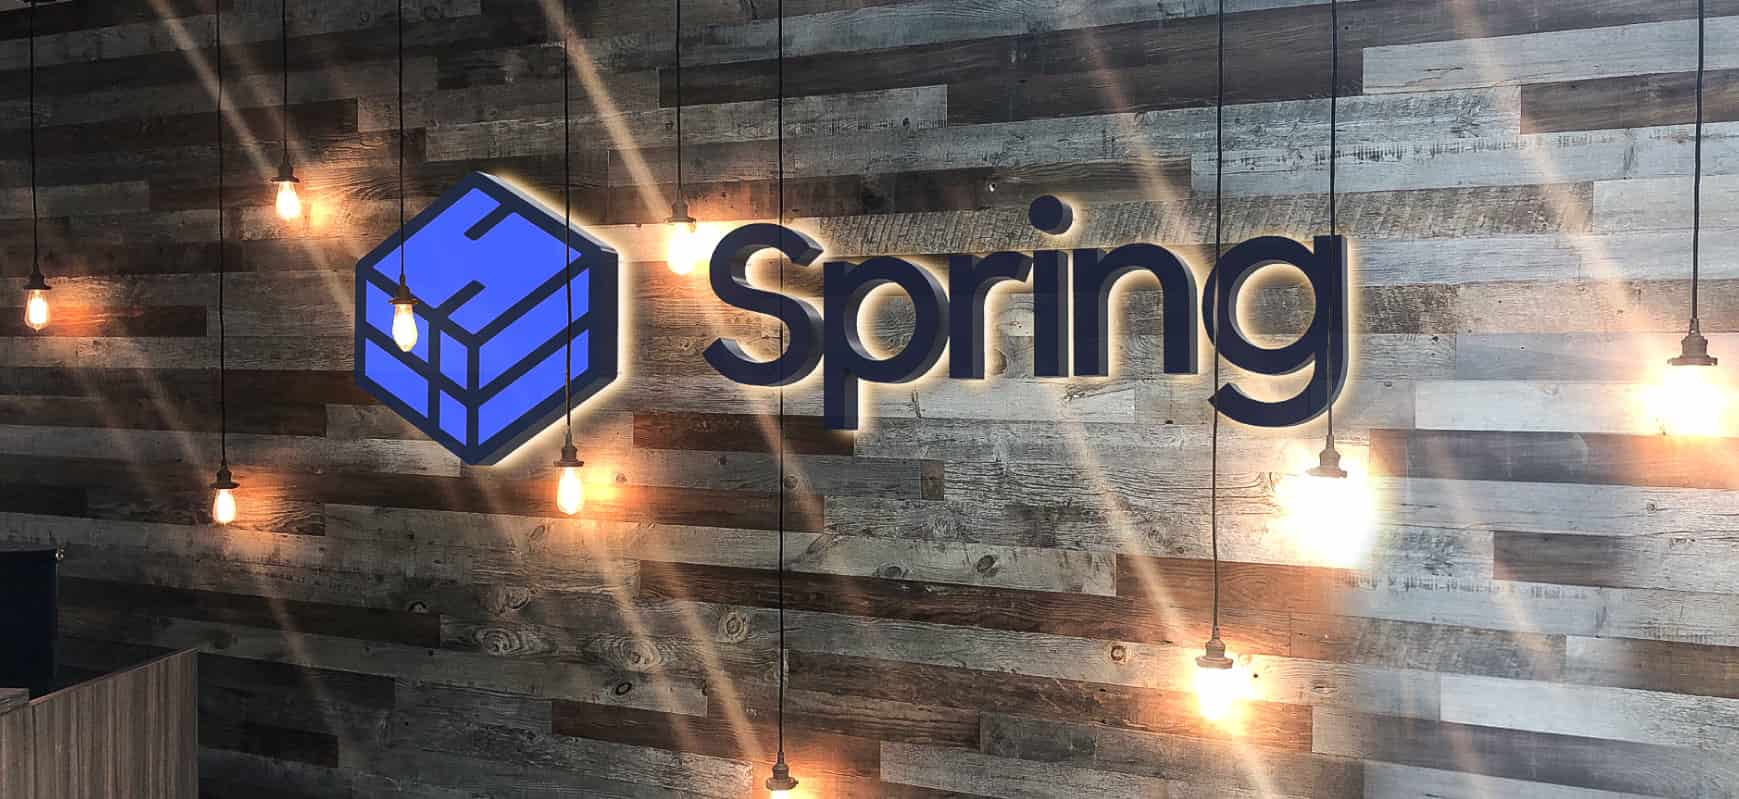 Spring modern signage design featuring the brand name and logo with backlit illumination